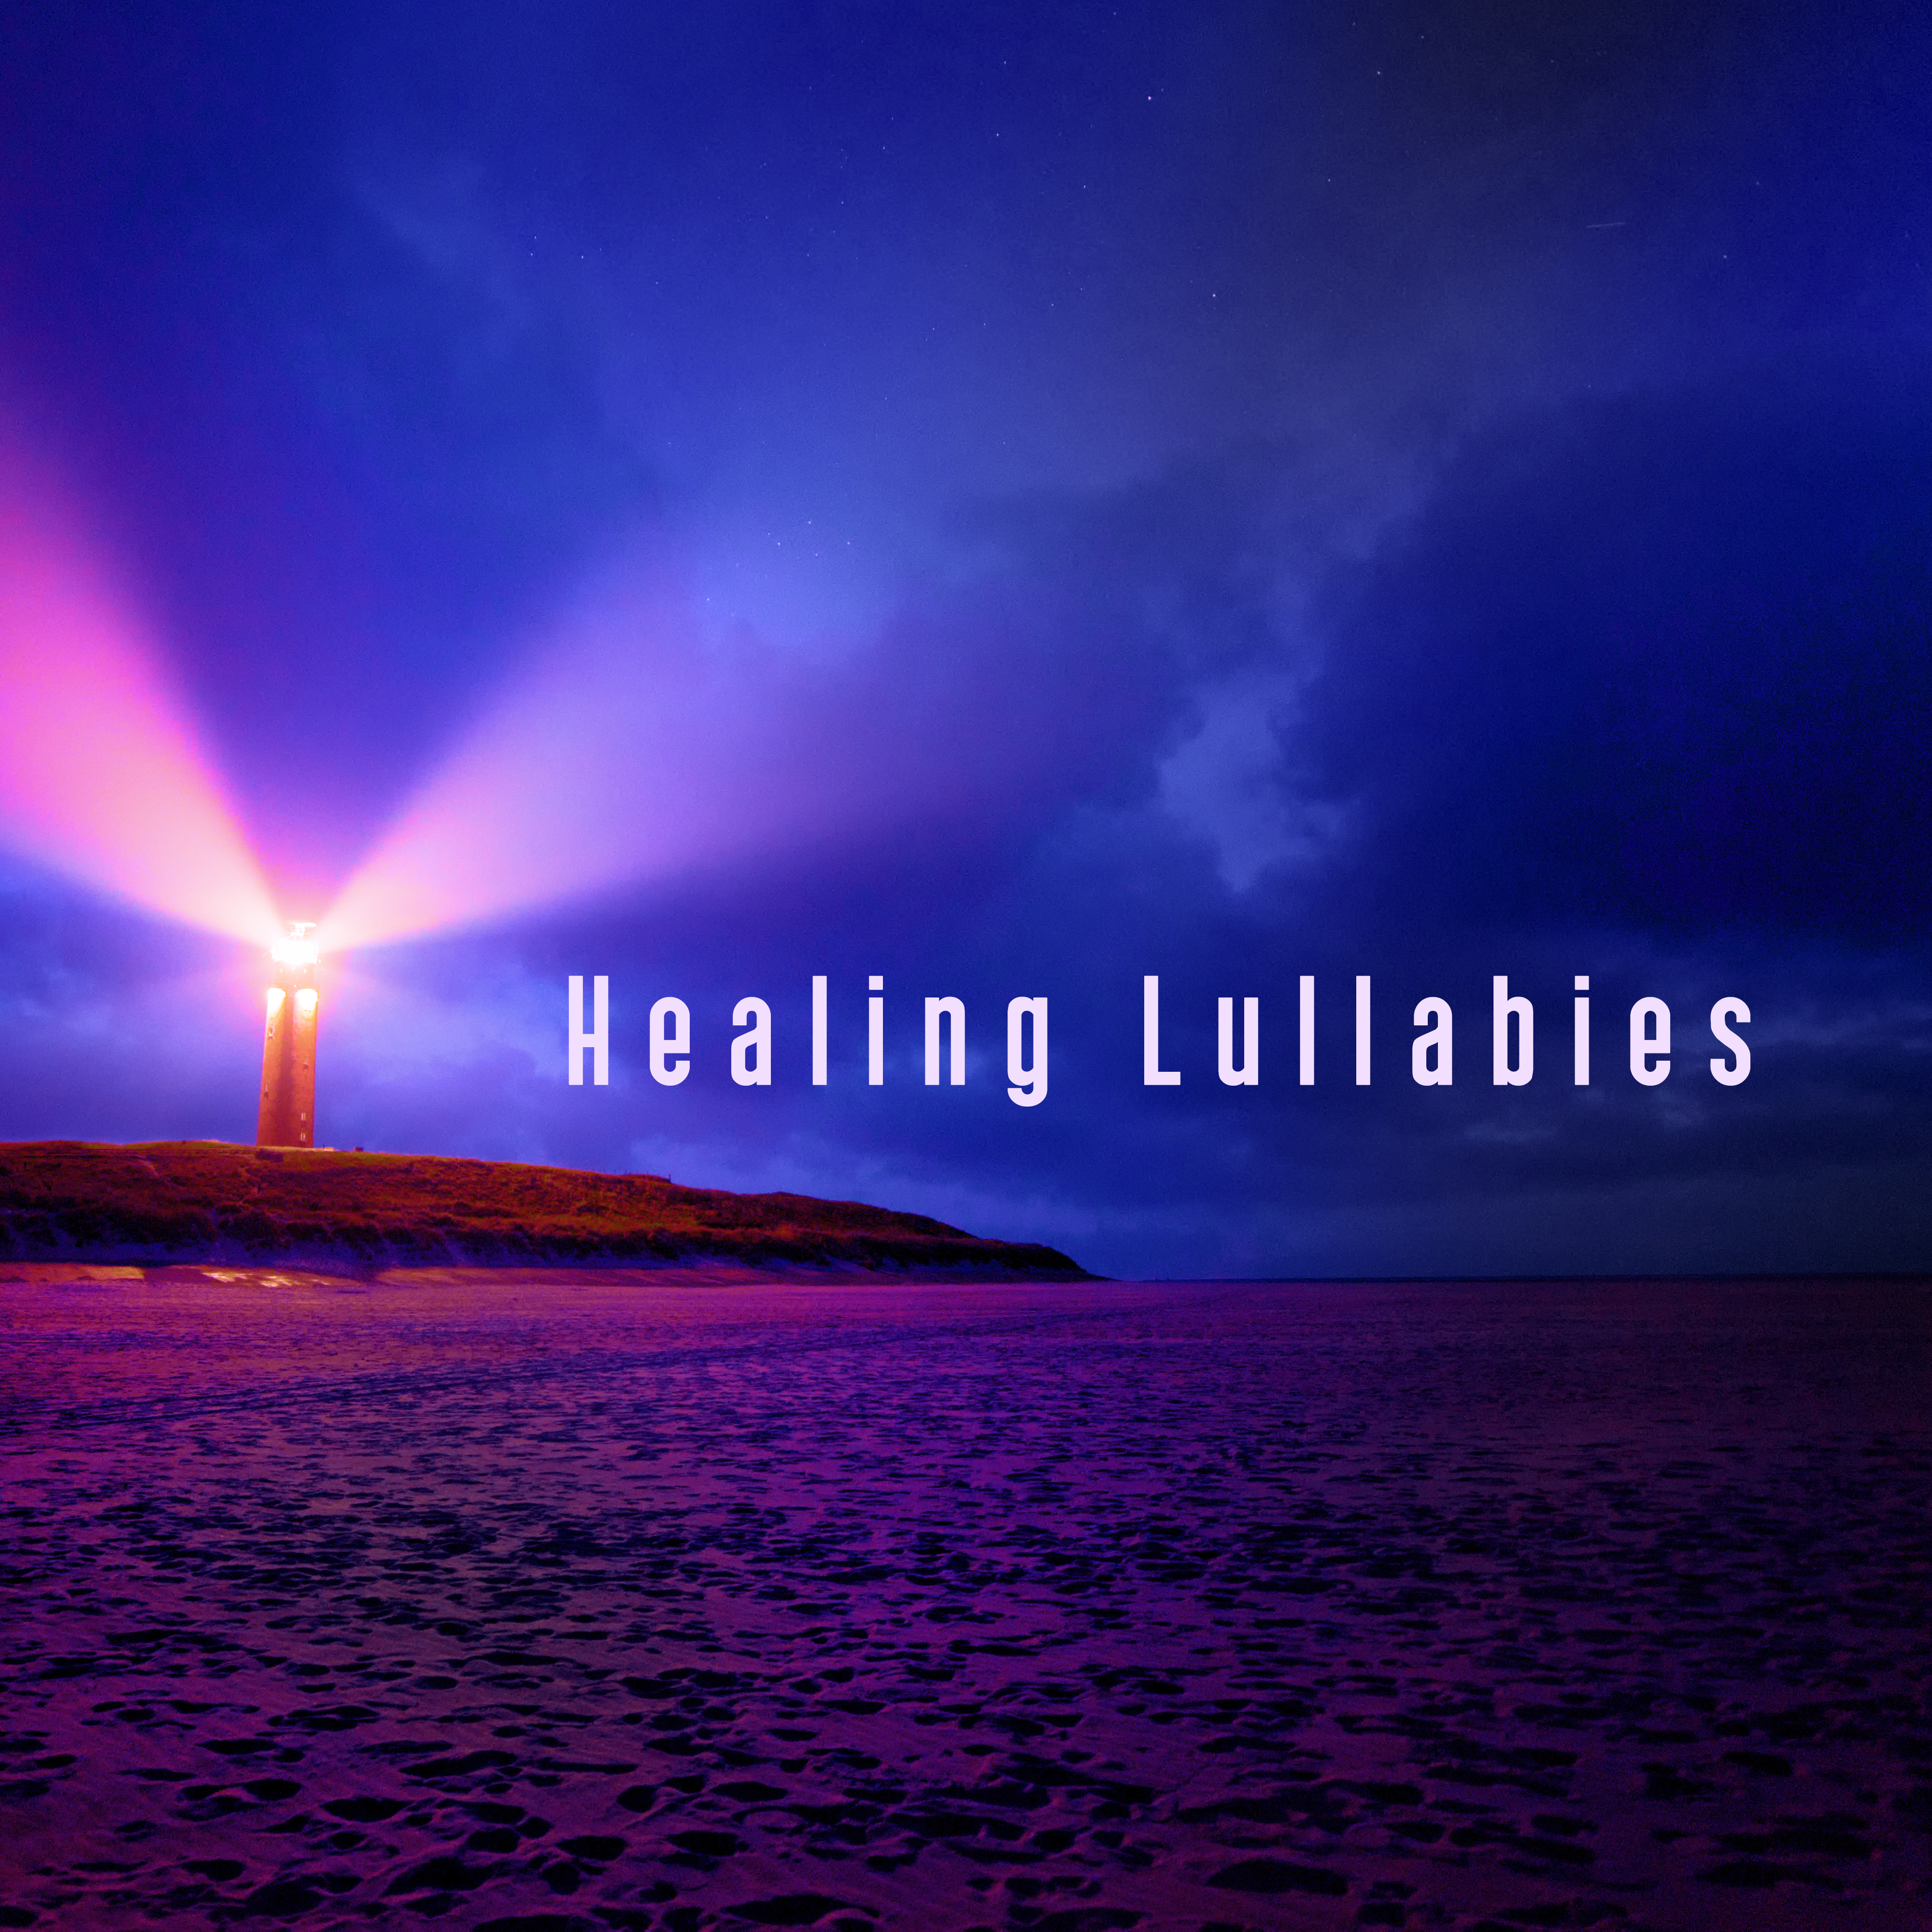 Healing Lullabies – Soft Nature Sounds for Sleep, Pure Mind, Relaxation, Sweet Dreams, Rest, Bedtime